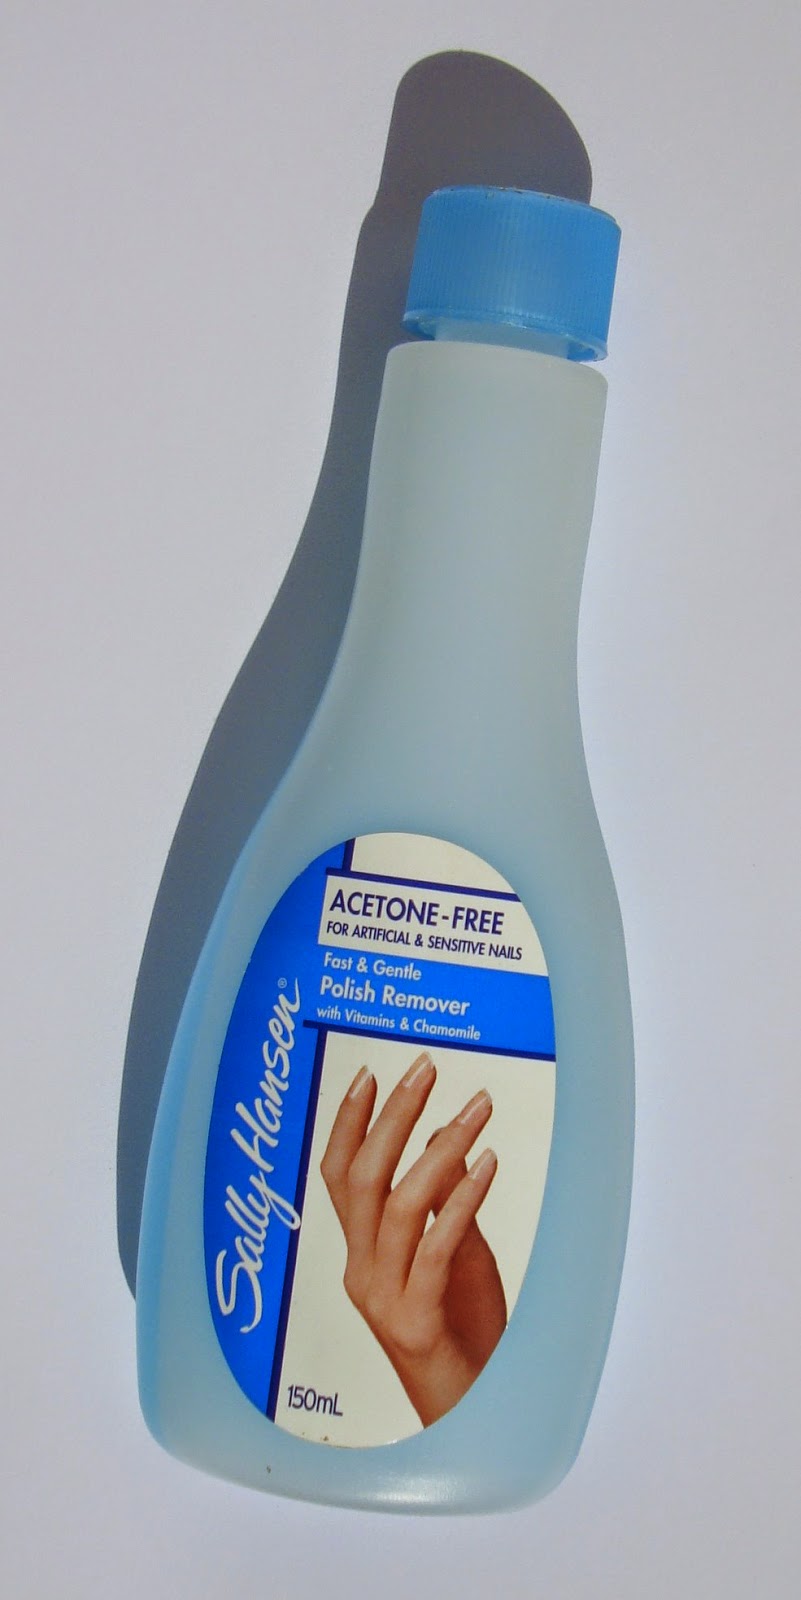 little white truths: Sally Hansen Acetone-free Nail Polish Remover - review